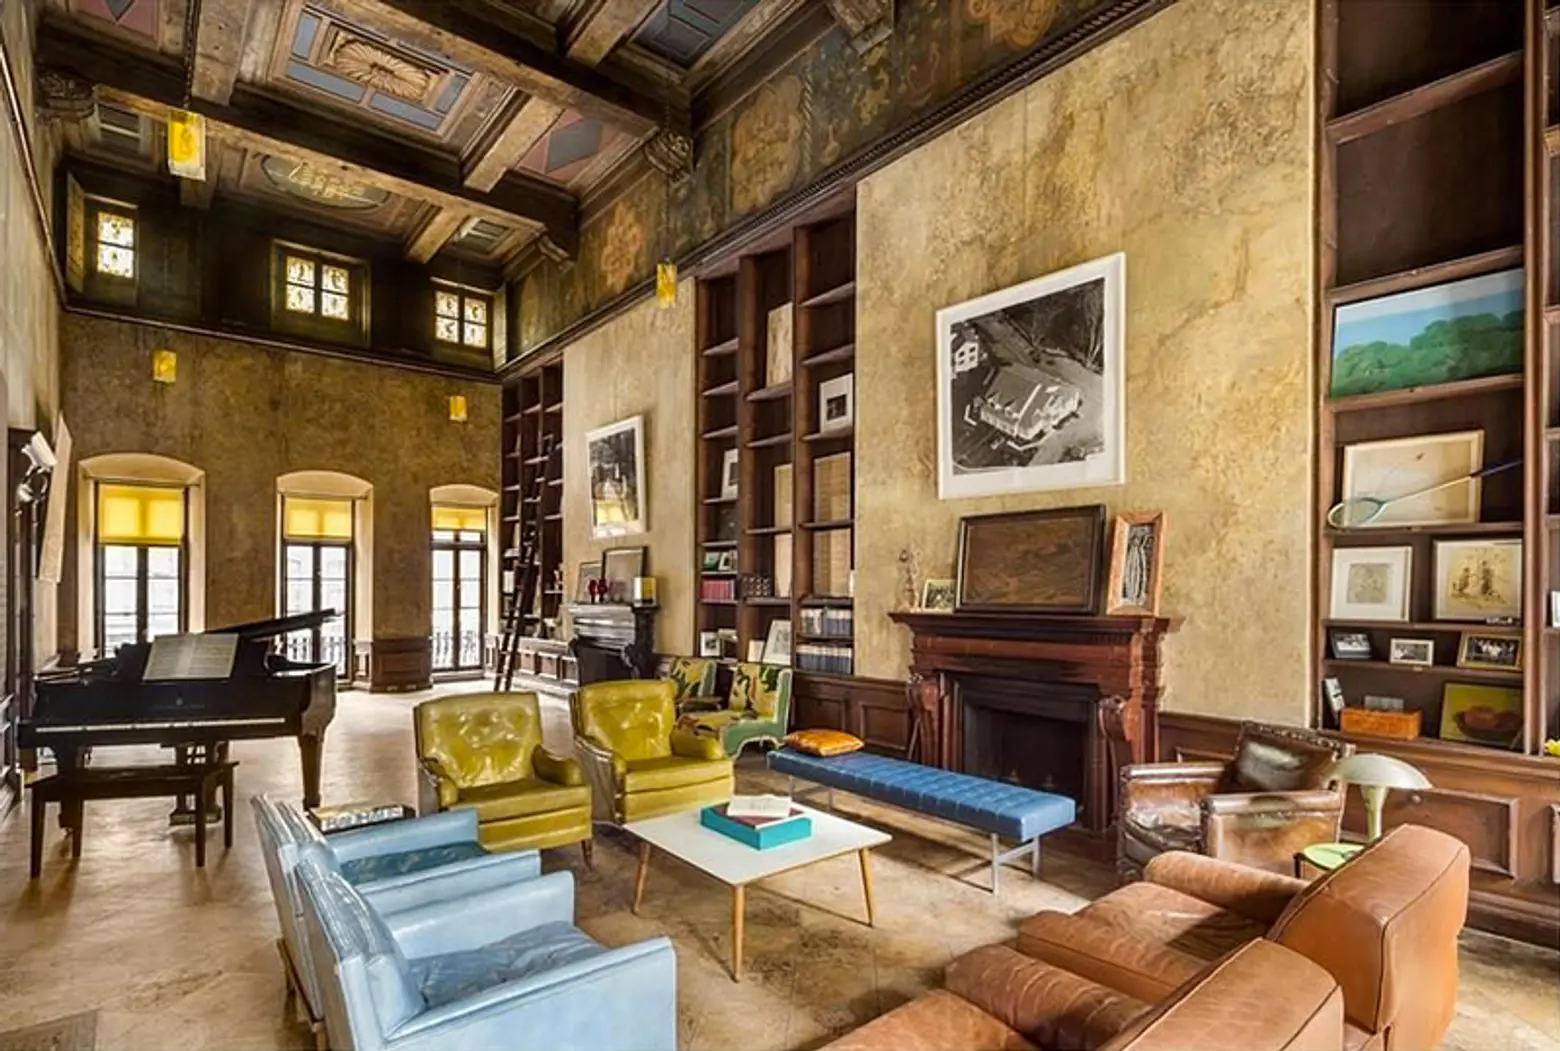 Mary-Kate Olsen and Olivier Sarkozy Scoop Up Painter David Deutsch’s Turtle Bay Townhome for $13.5 Million